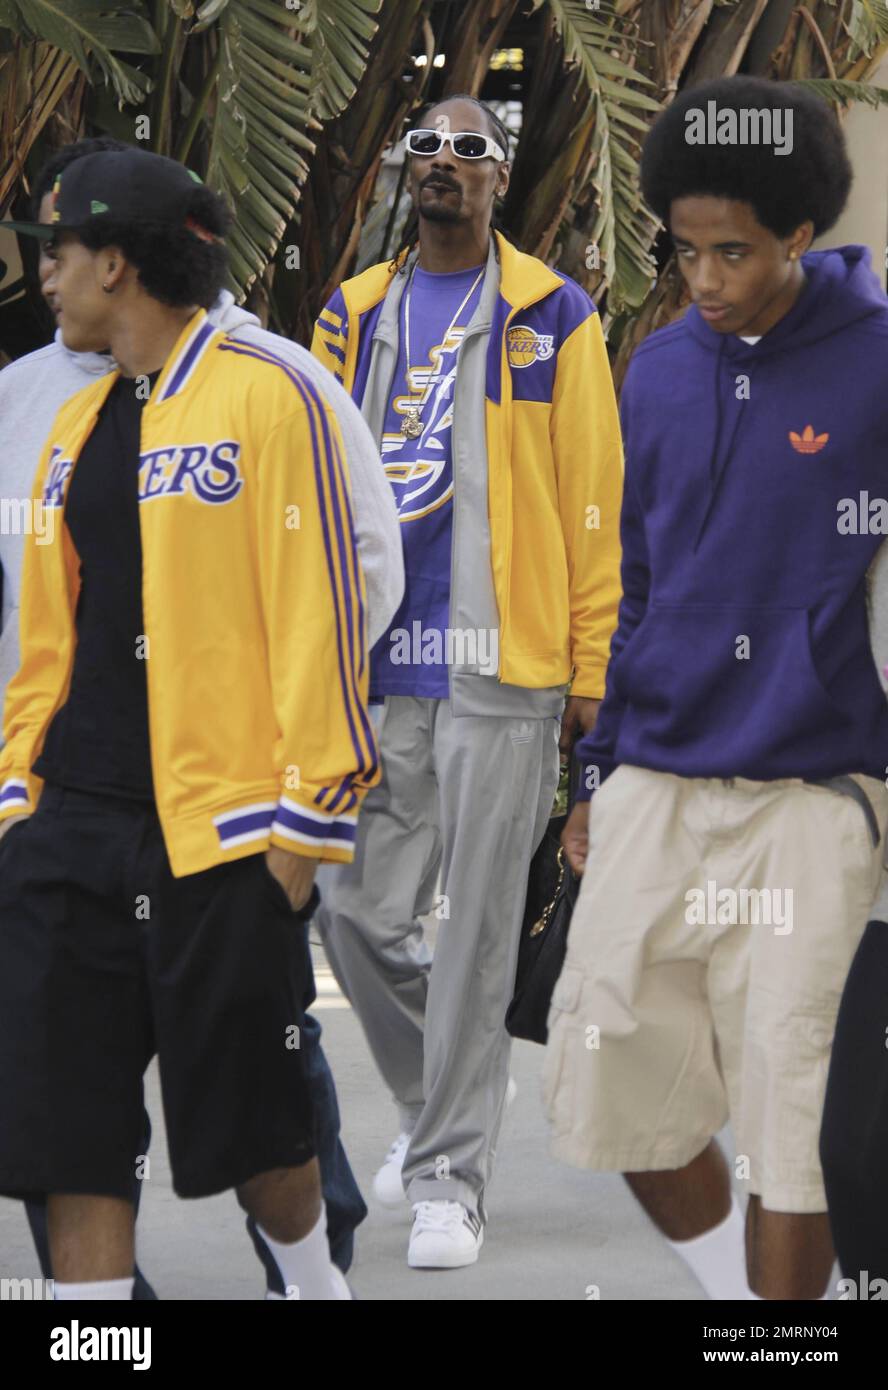 Snoop Dogg arrives at the Staples Center to watch Los Angeles Lakers vs the  Chicago Bulls basketball game. Finally back from the lockout that nearly  shut down the entire NBA season, the Bulls pulled out an 88-87 victory in  their 2011-2012 opener game